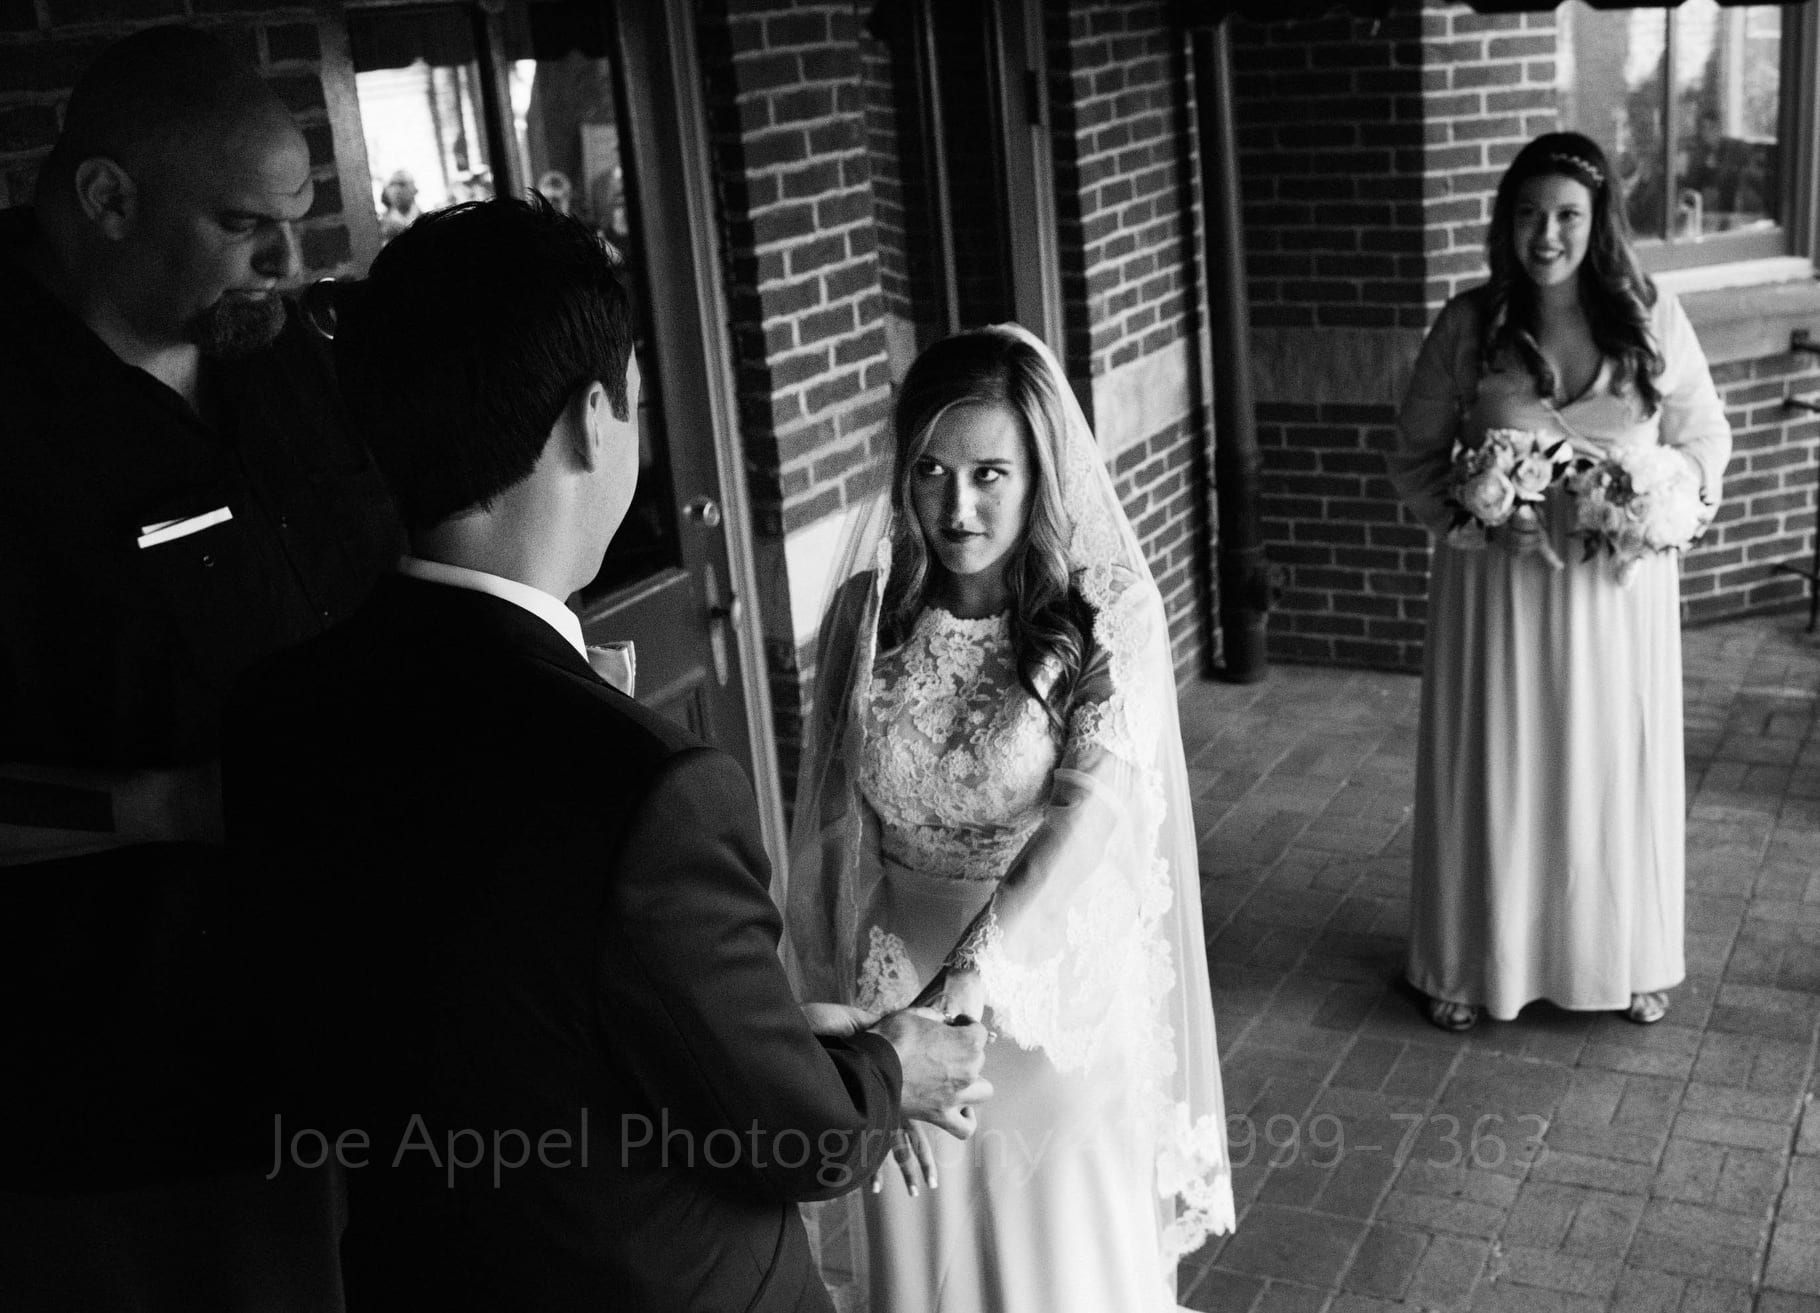 Seen from above the groom's shoulder, a bride looks up as he places a ring on her finger.